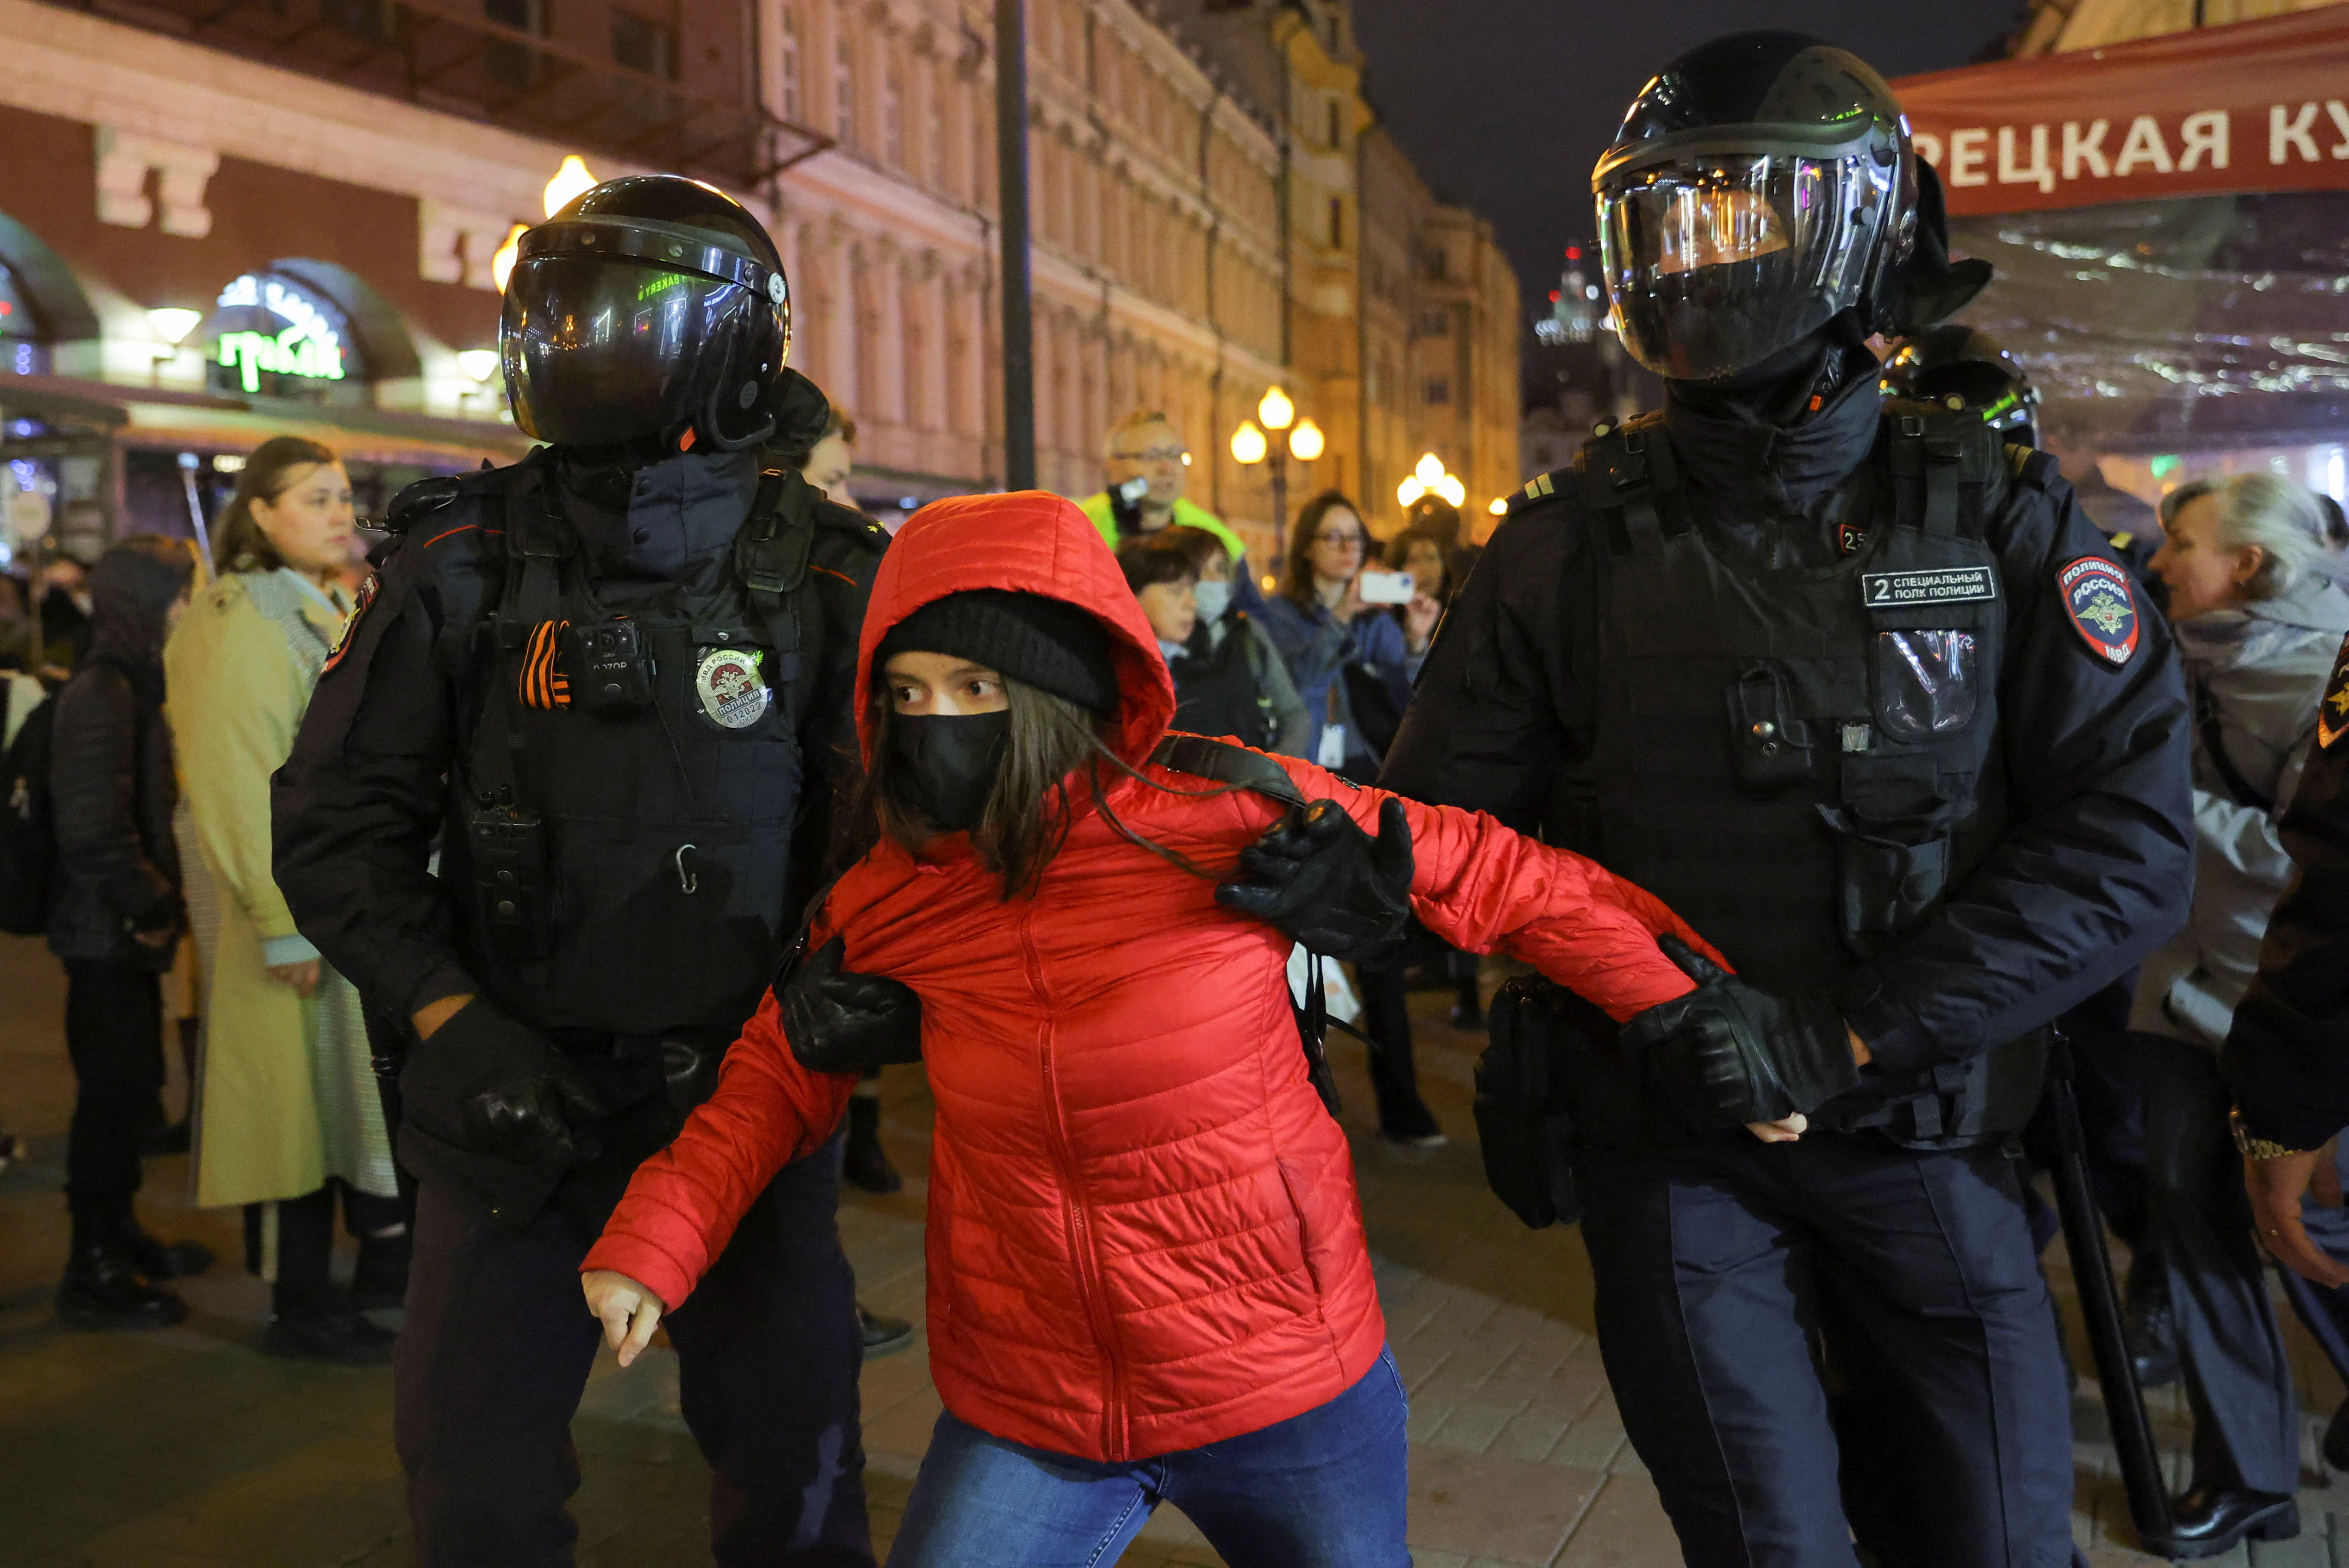 A young woman is detained by Moscow authorities (2022. REUTERS/REUTERS Photographer)